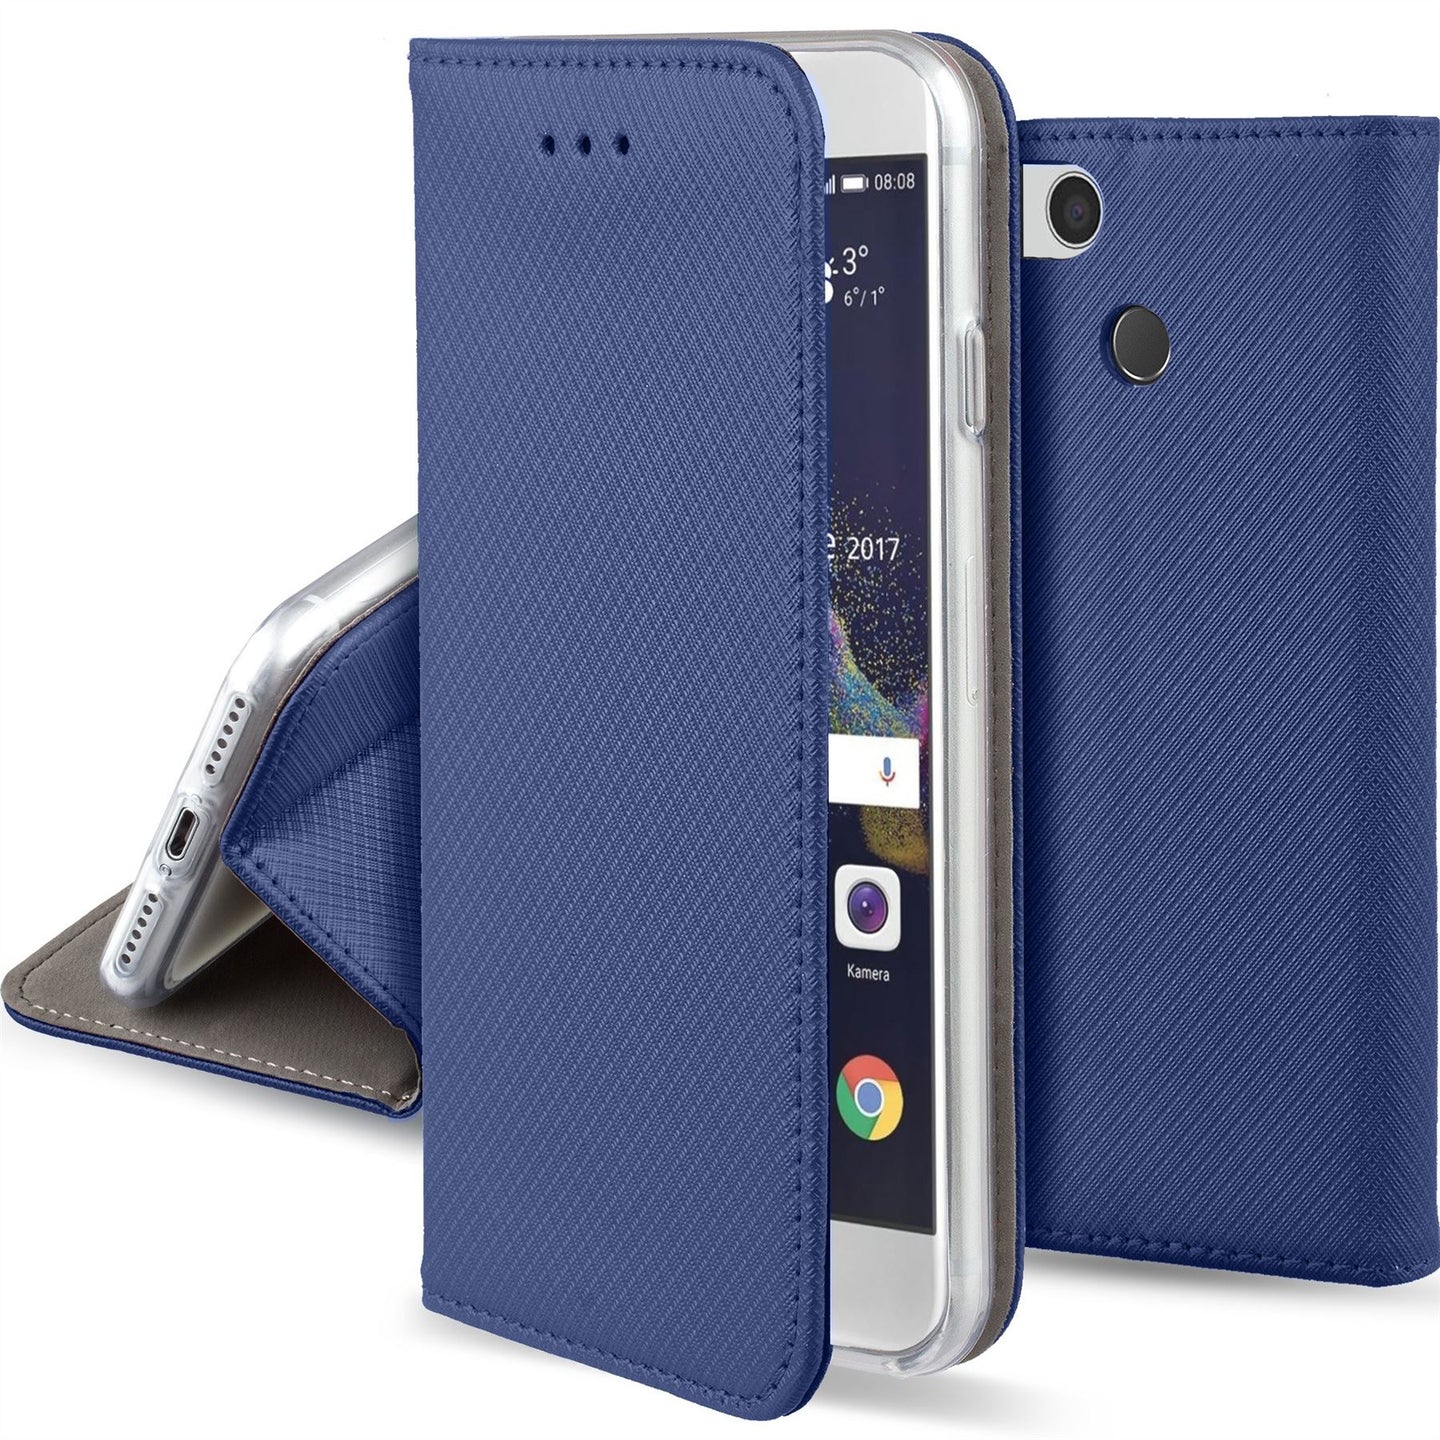 Moozy Case Flip Cover for Huawei P8 Lite 2017, Dark Blue - Smart Magnetic Flip Case with Card Holder and Stand